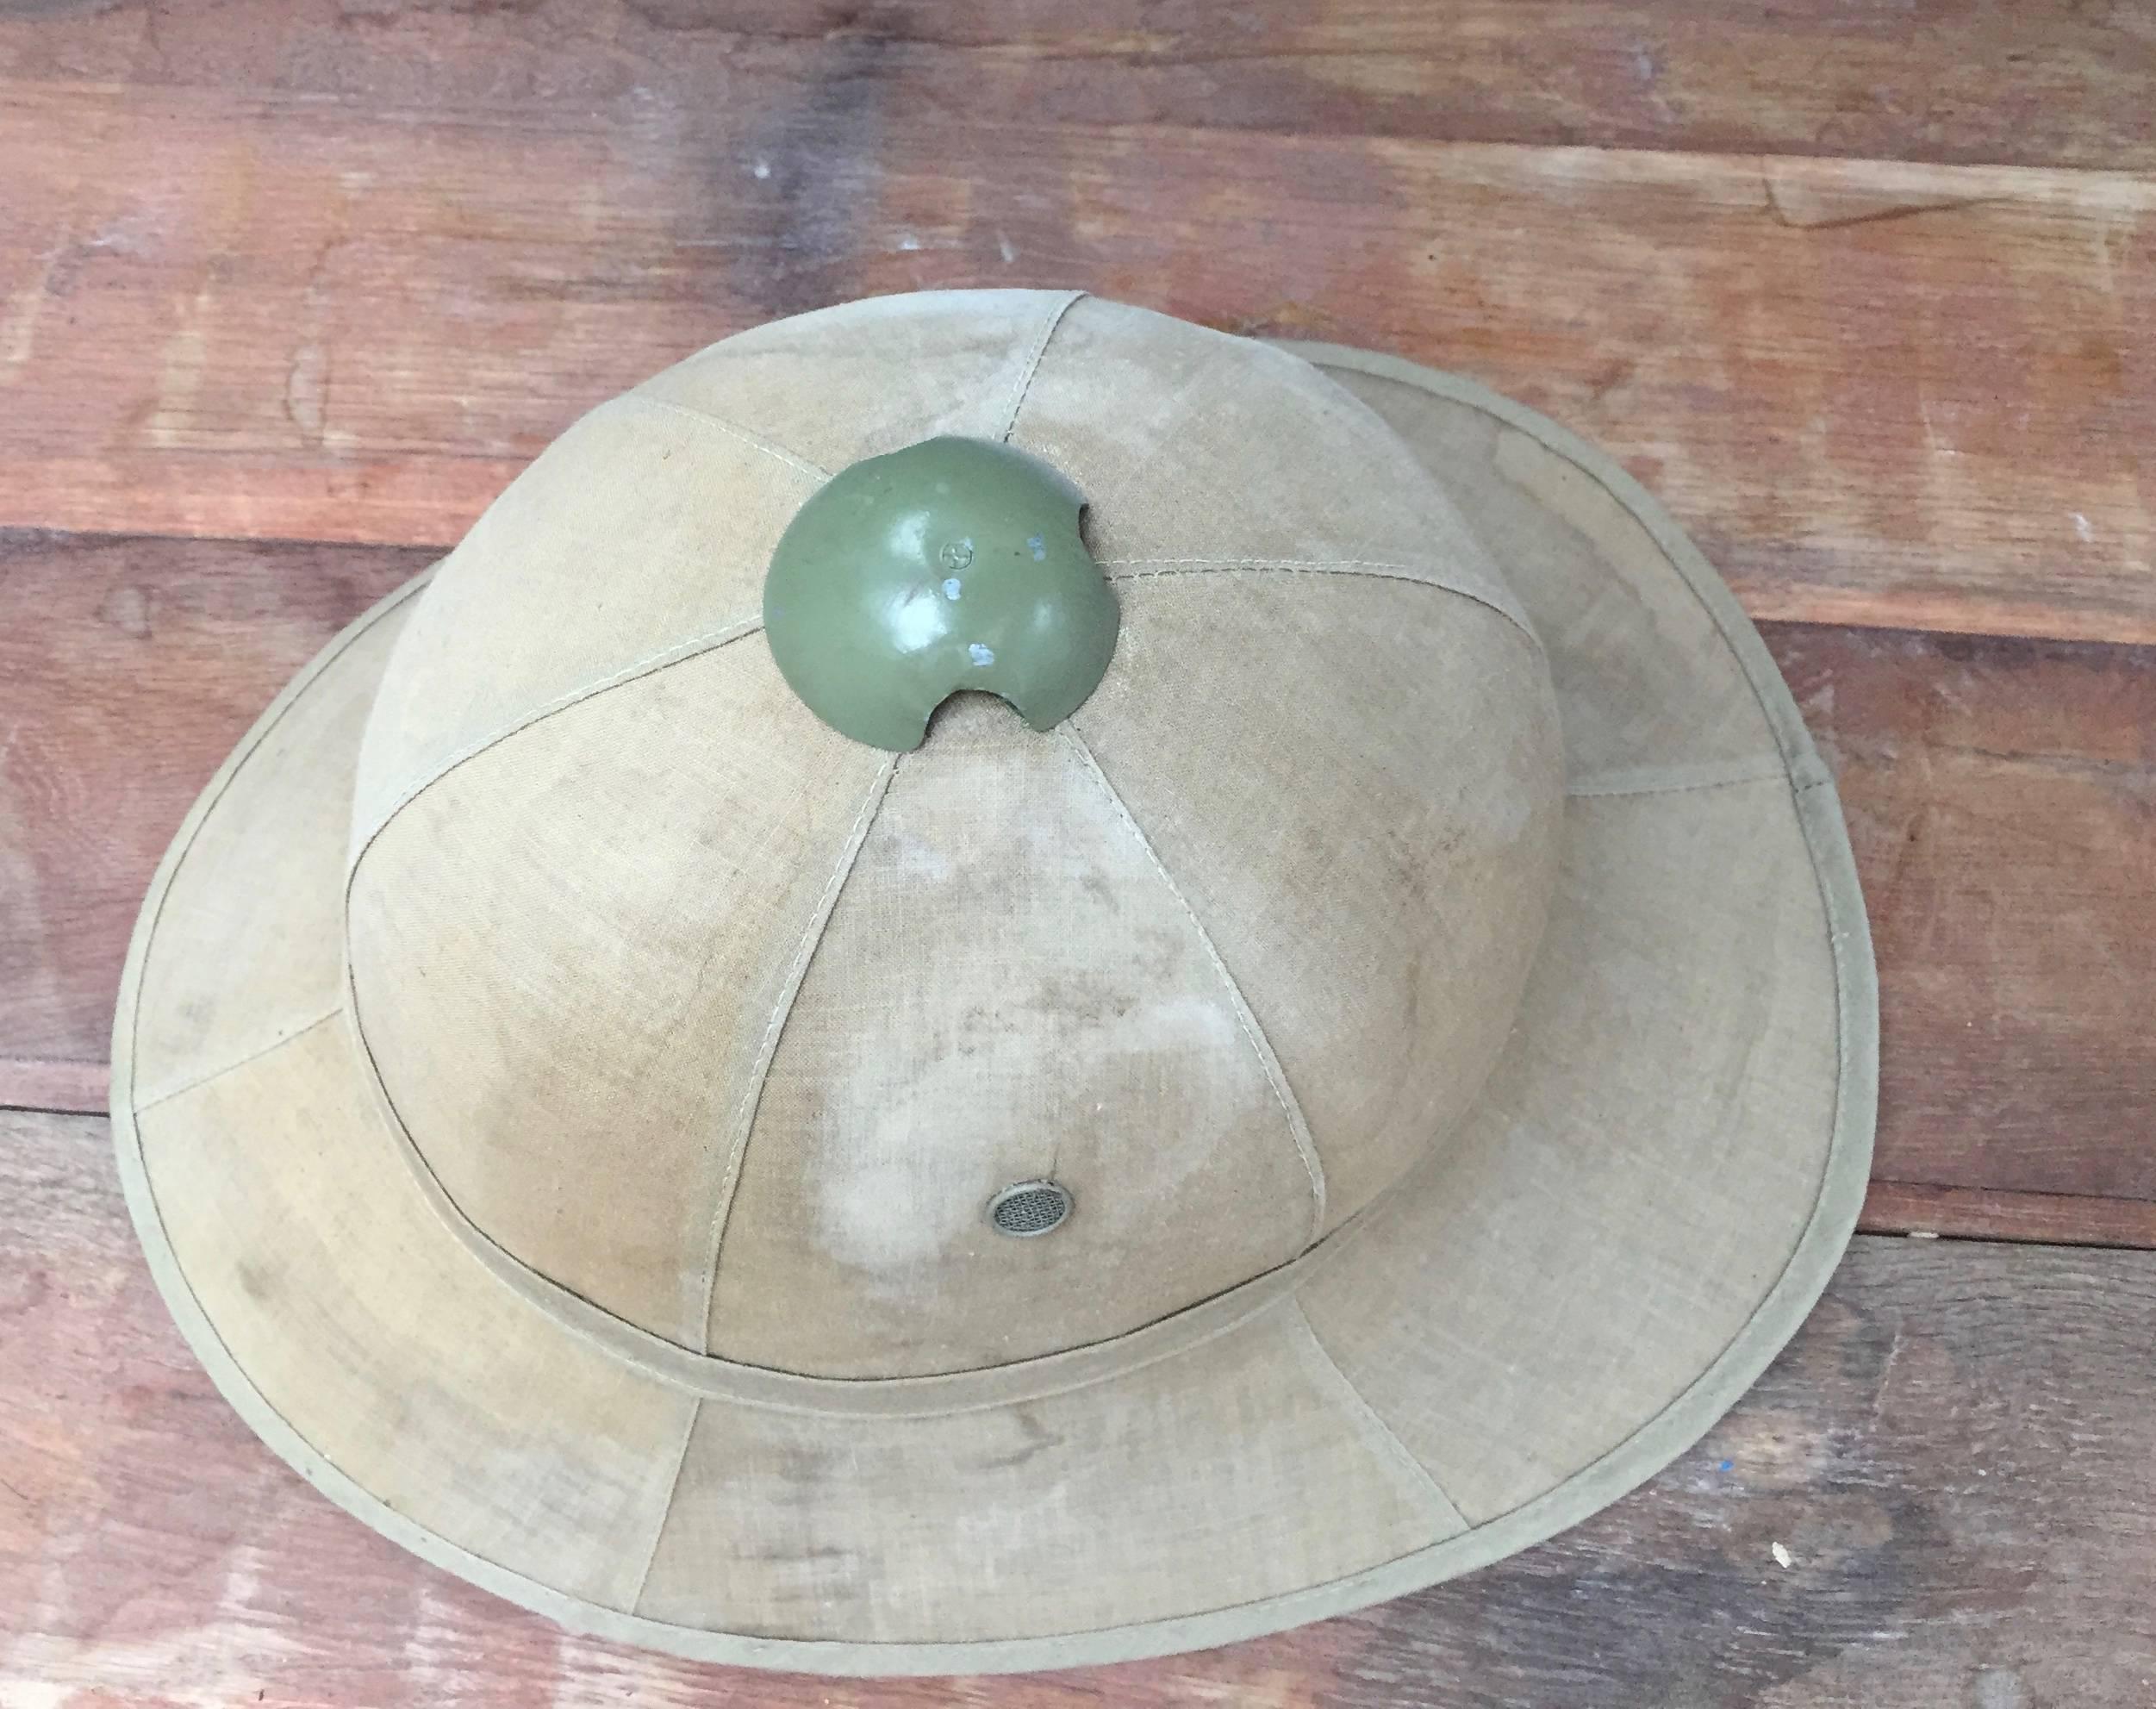 Wolseley model pith helmet used in the Belgian Congo in the 1940s. The Wolseley model was adopted by the Belgian troops from WWI until 1960 when Belgium left the Congo. Made of thin cork, the hats were soaked in water to provide cooling throughout